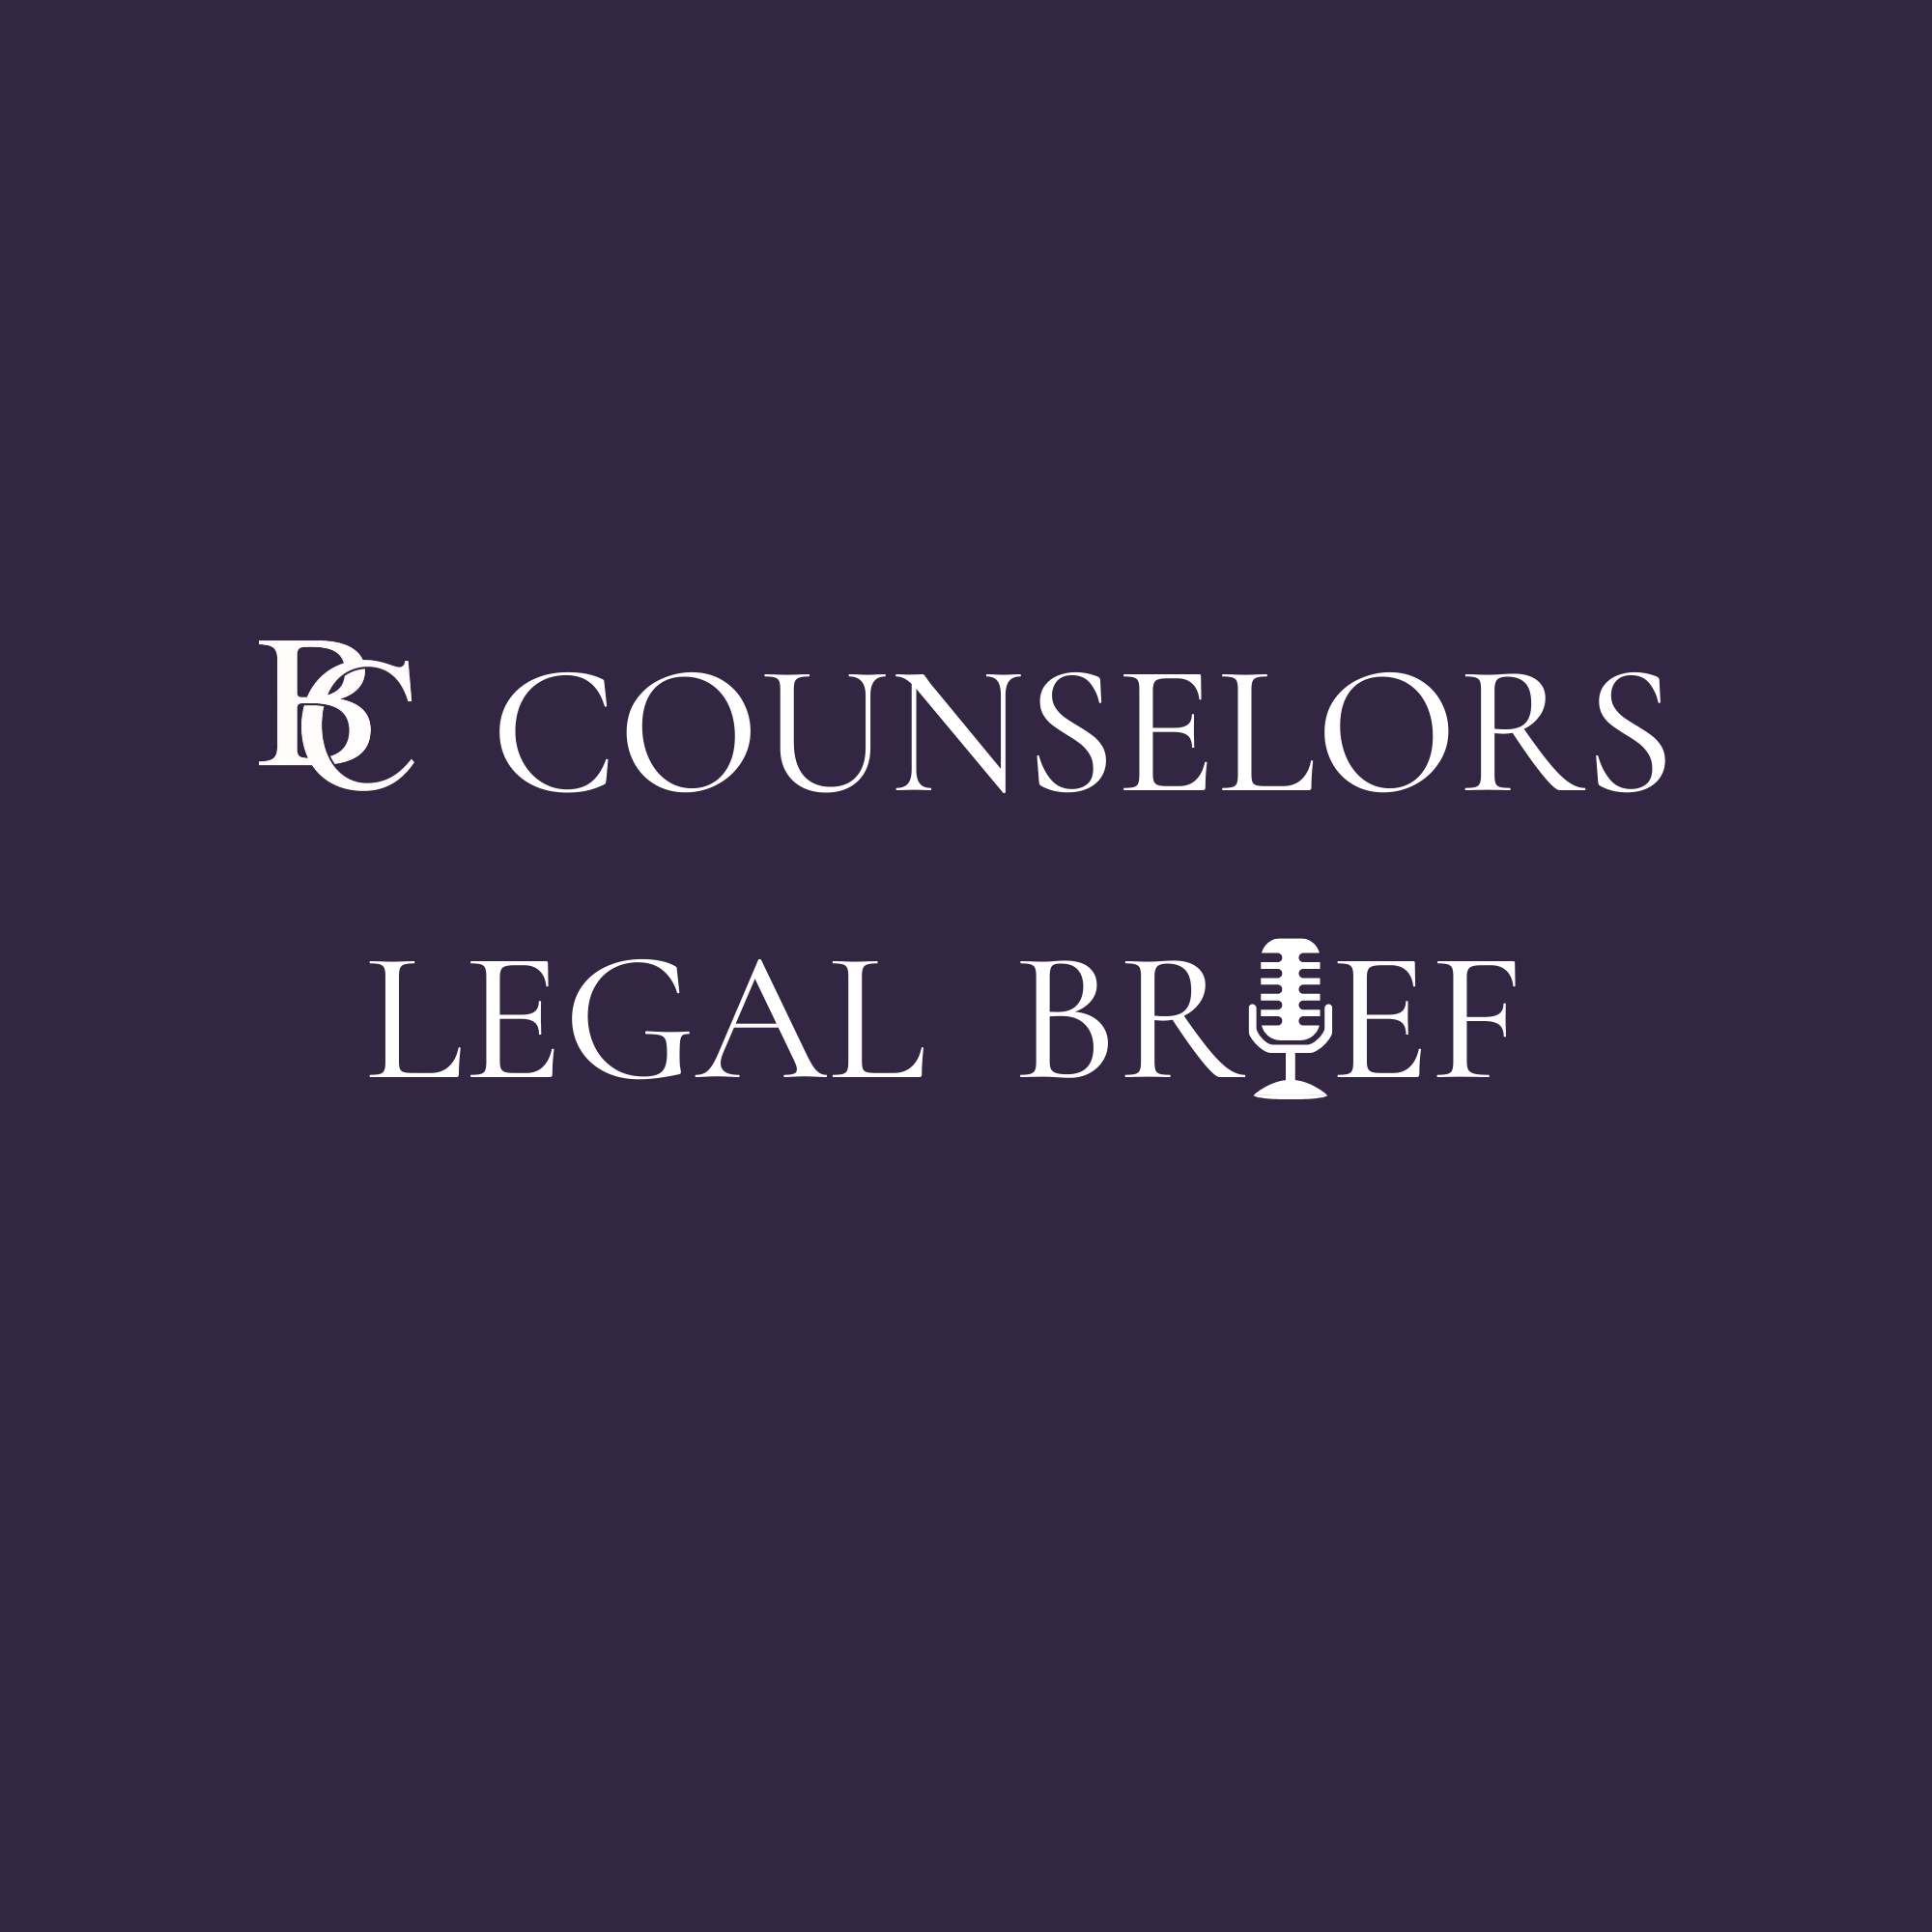 The BC Counselors Legal Brief